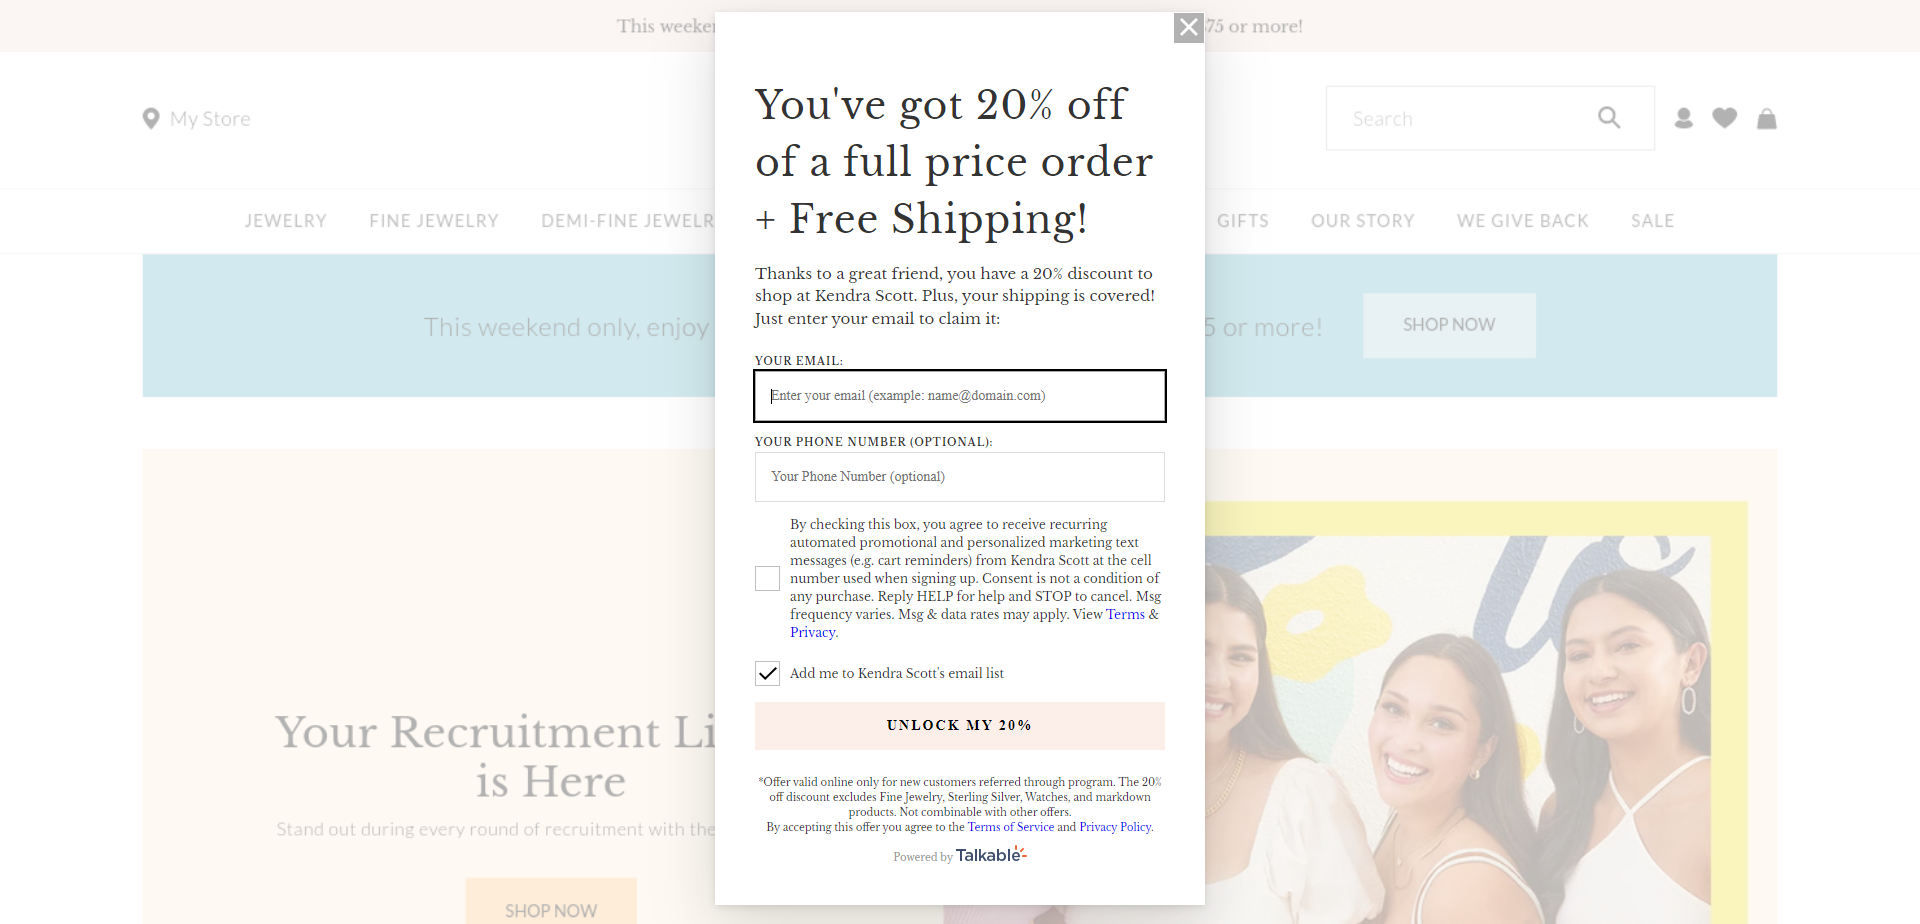 Referral Landing Page for Kendra Scott